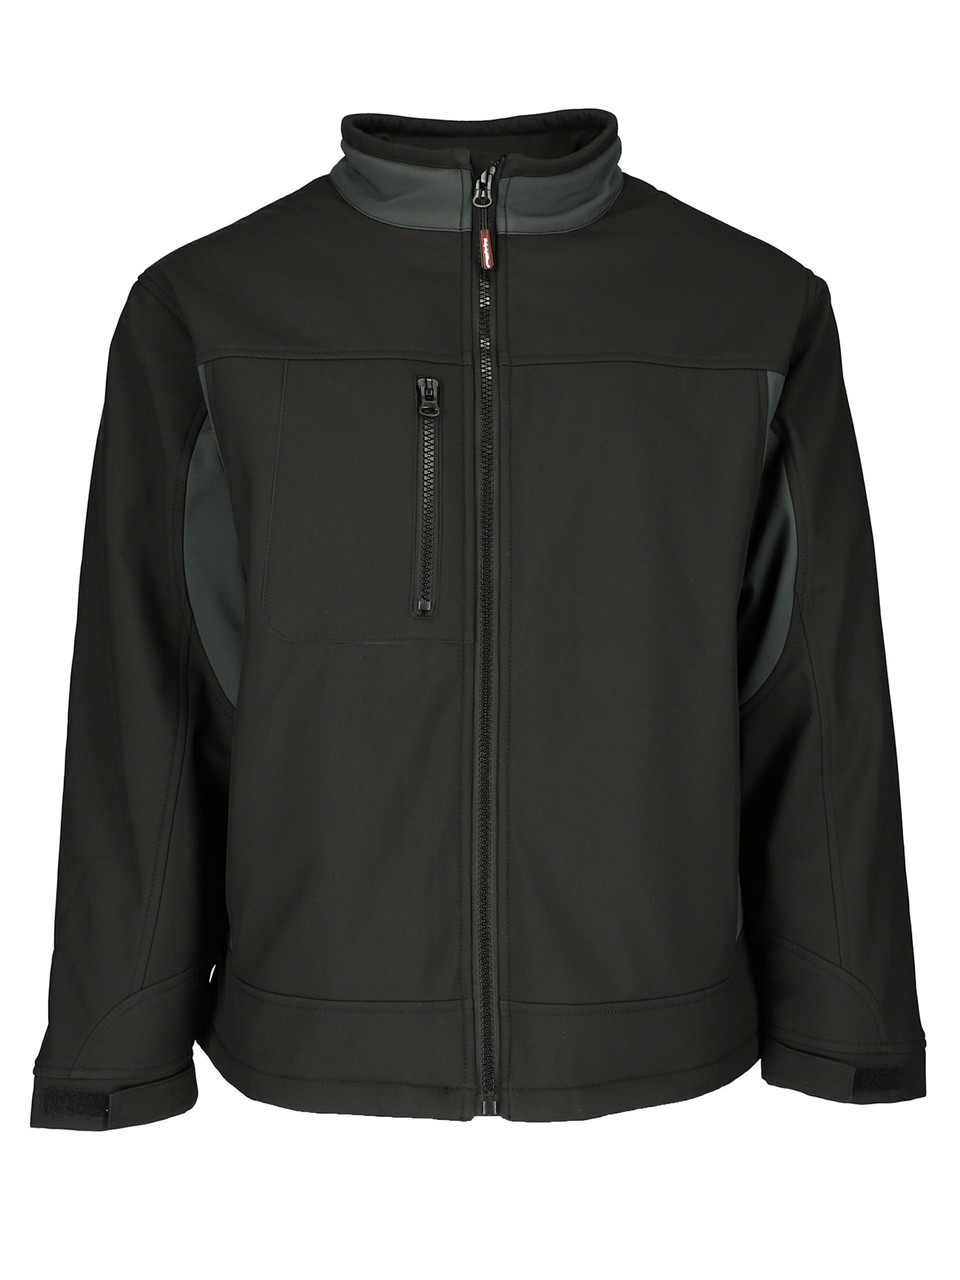 Insulated Softshell Jacket (490), Rated for -20°F